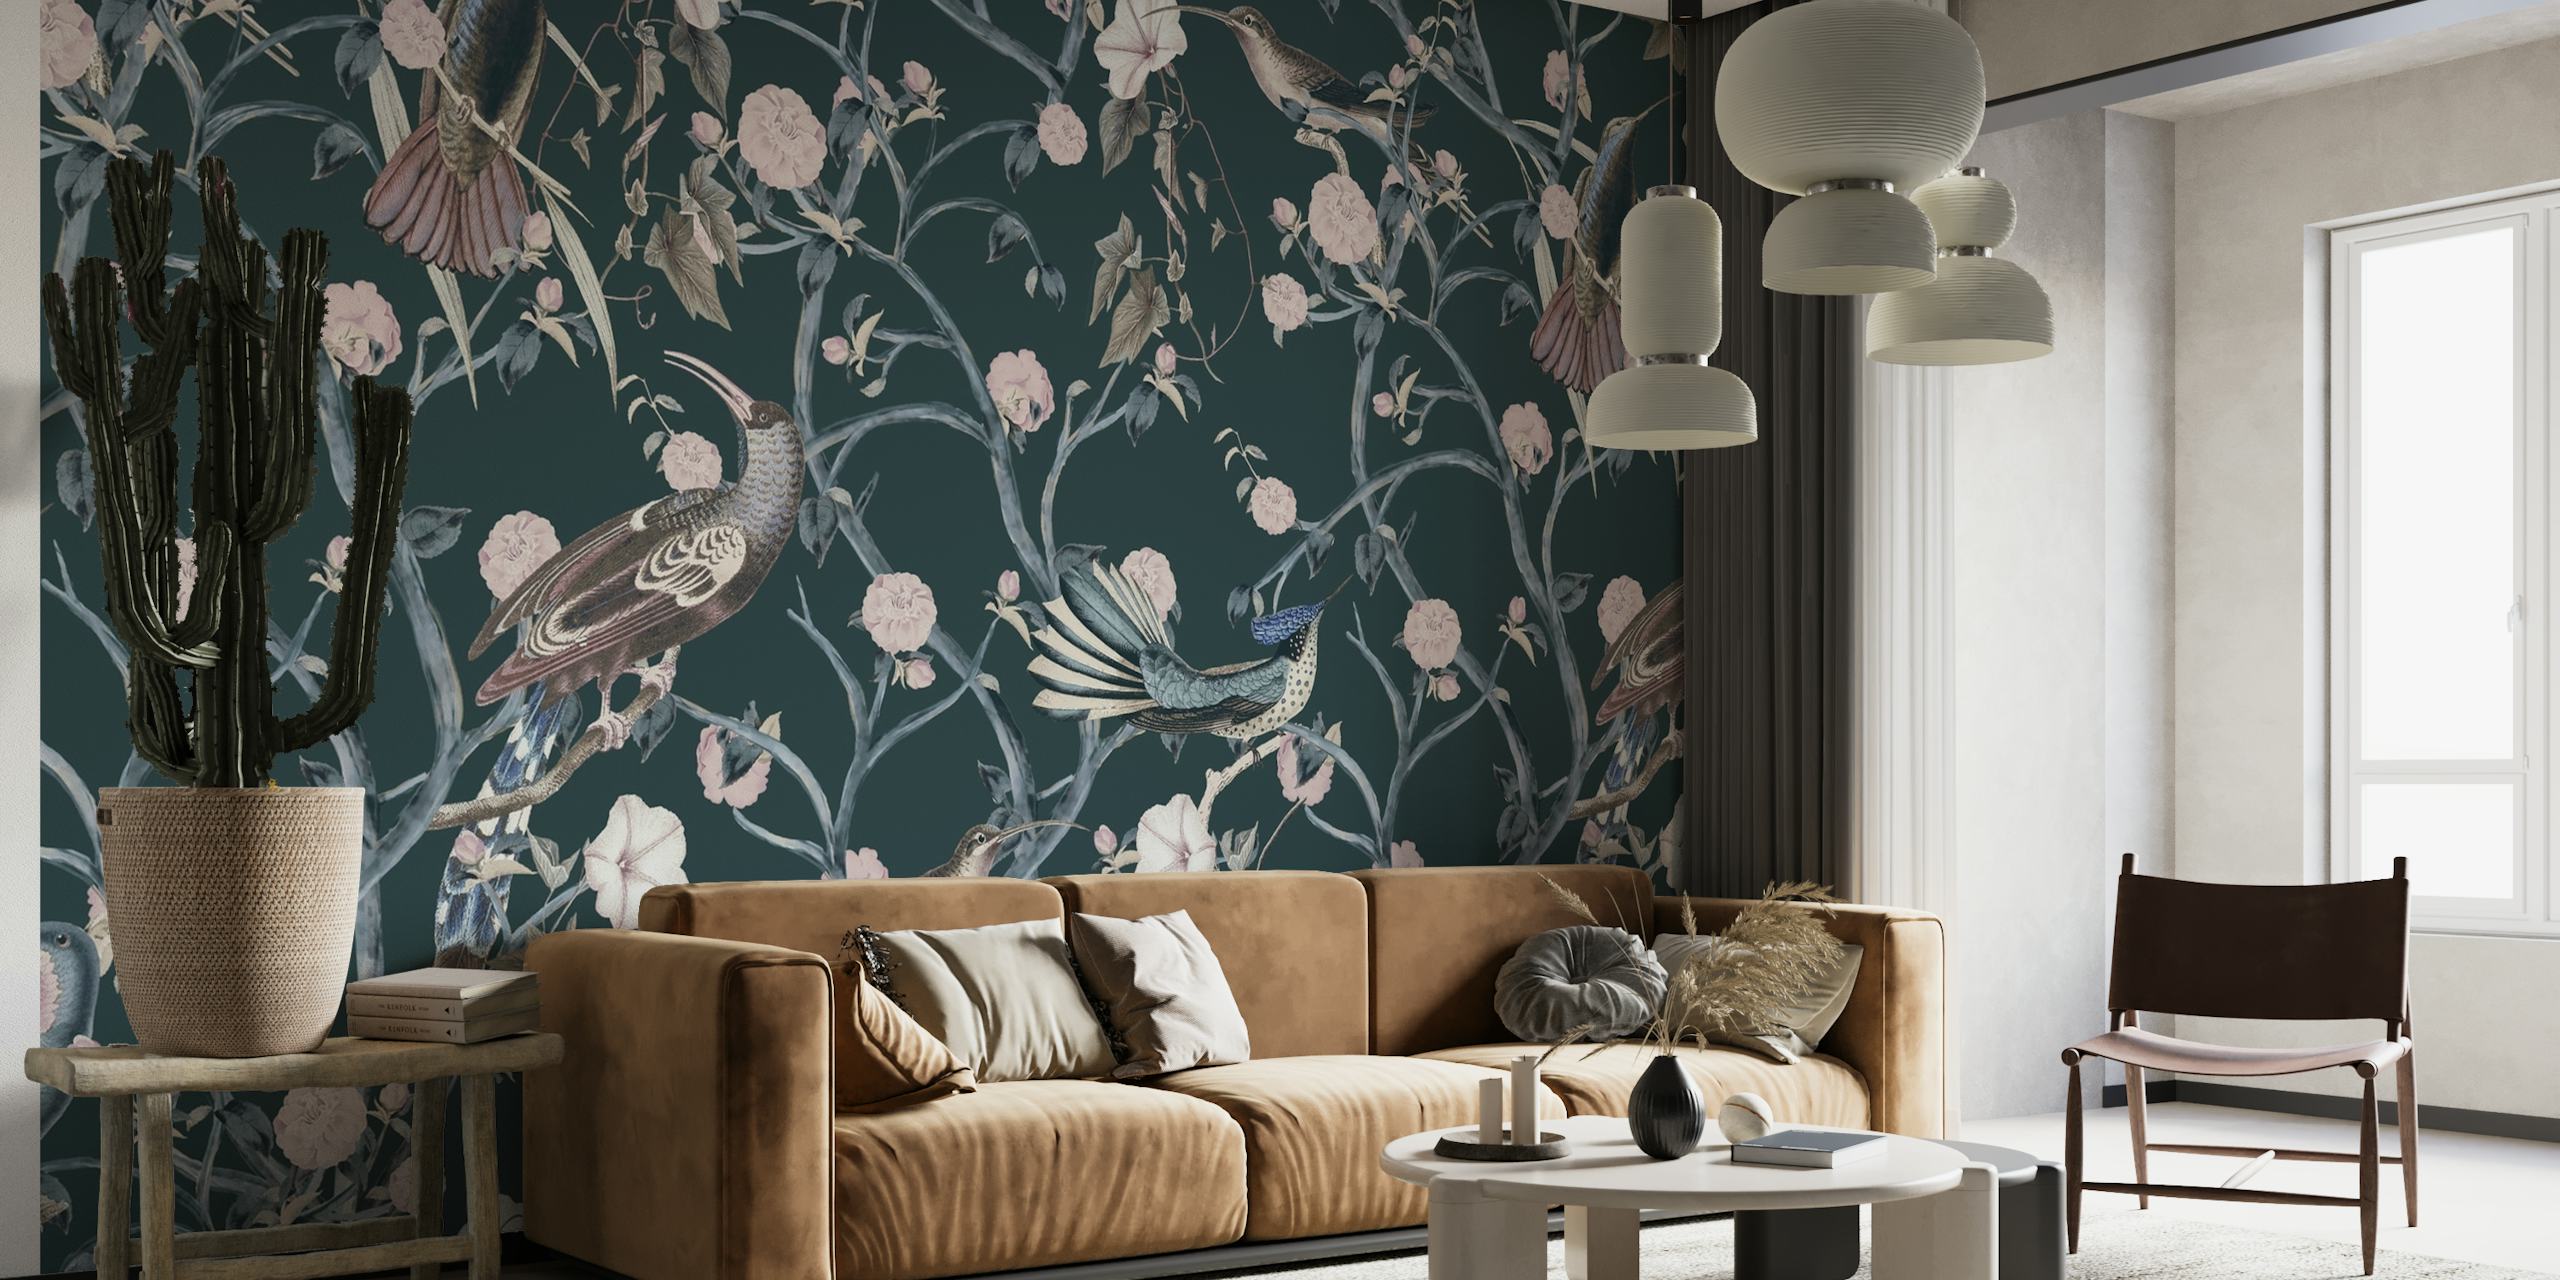 Chinoiserie style wallpaper with birds and flowering trees on a green background